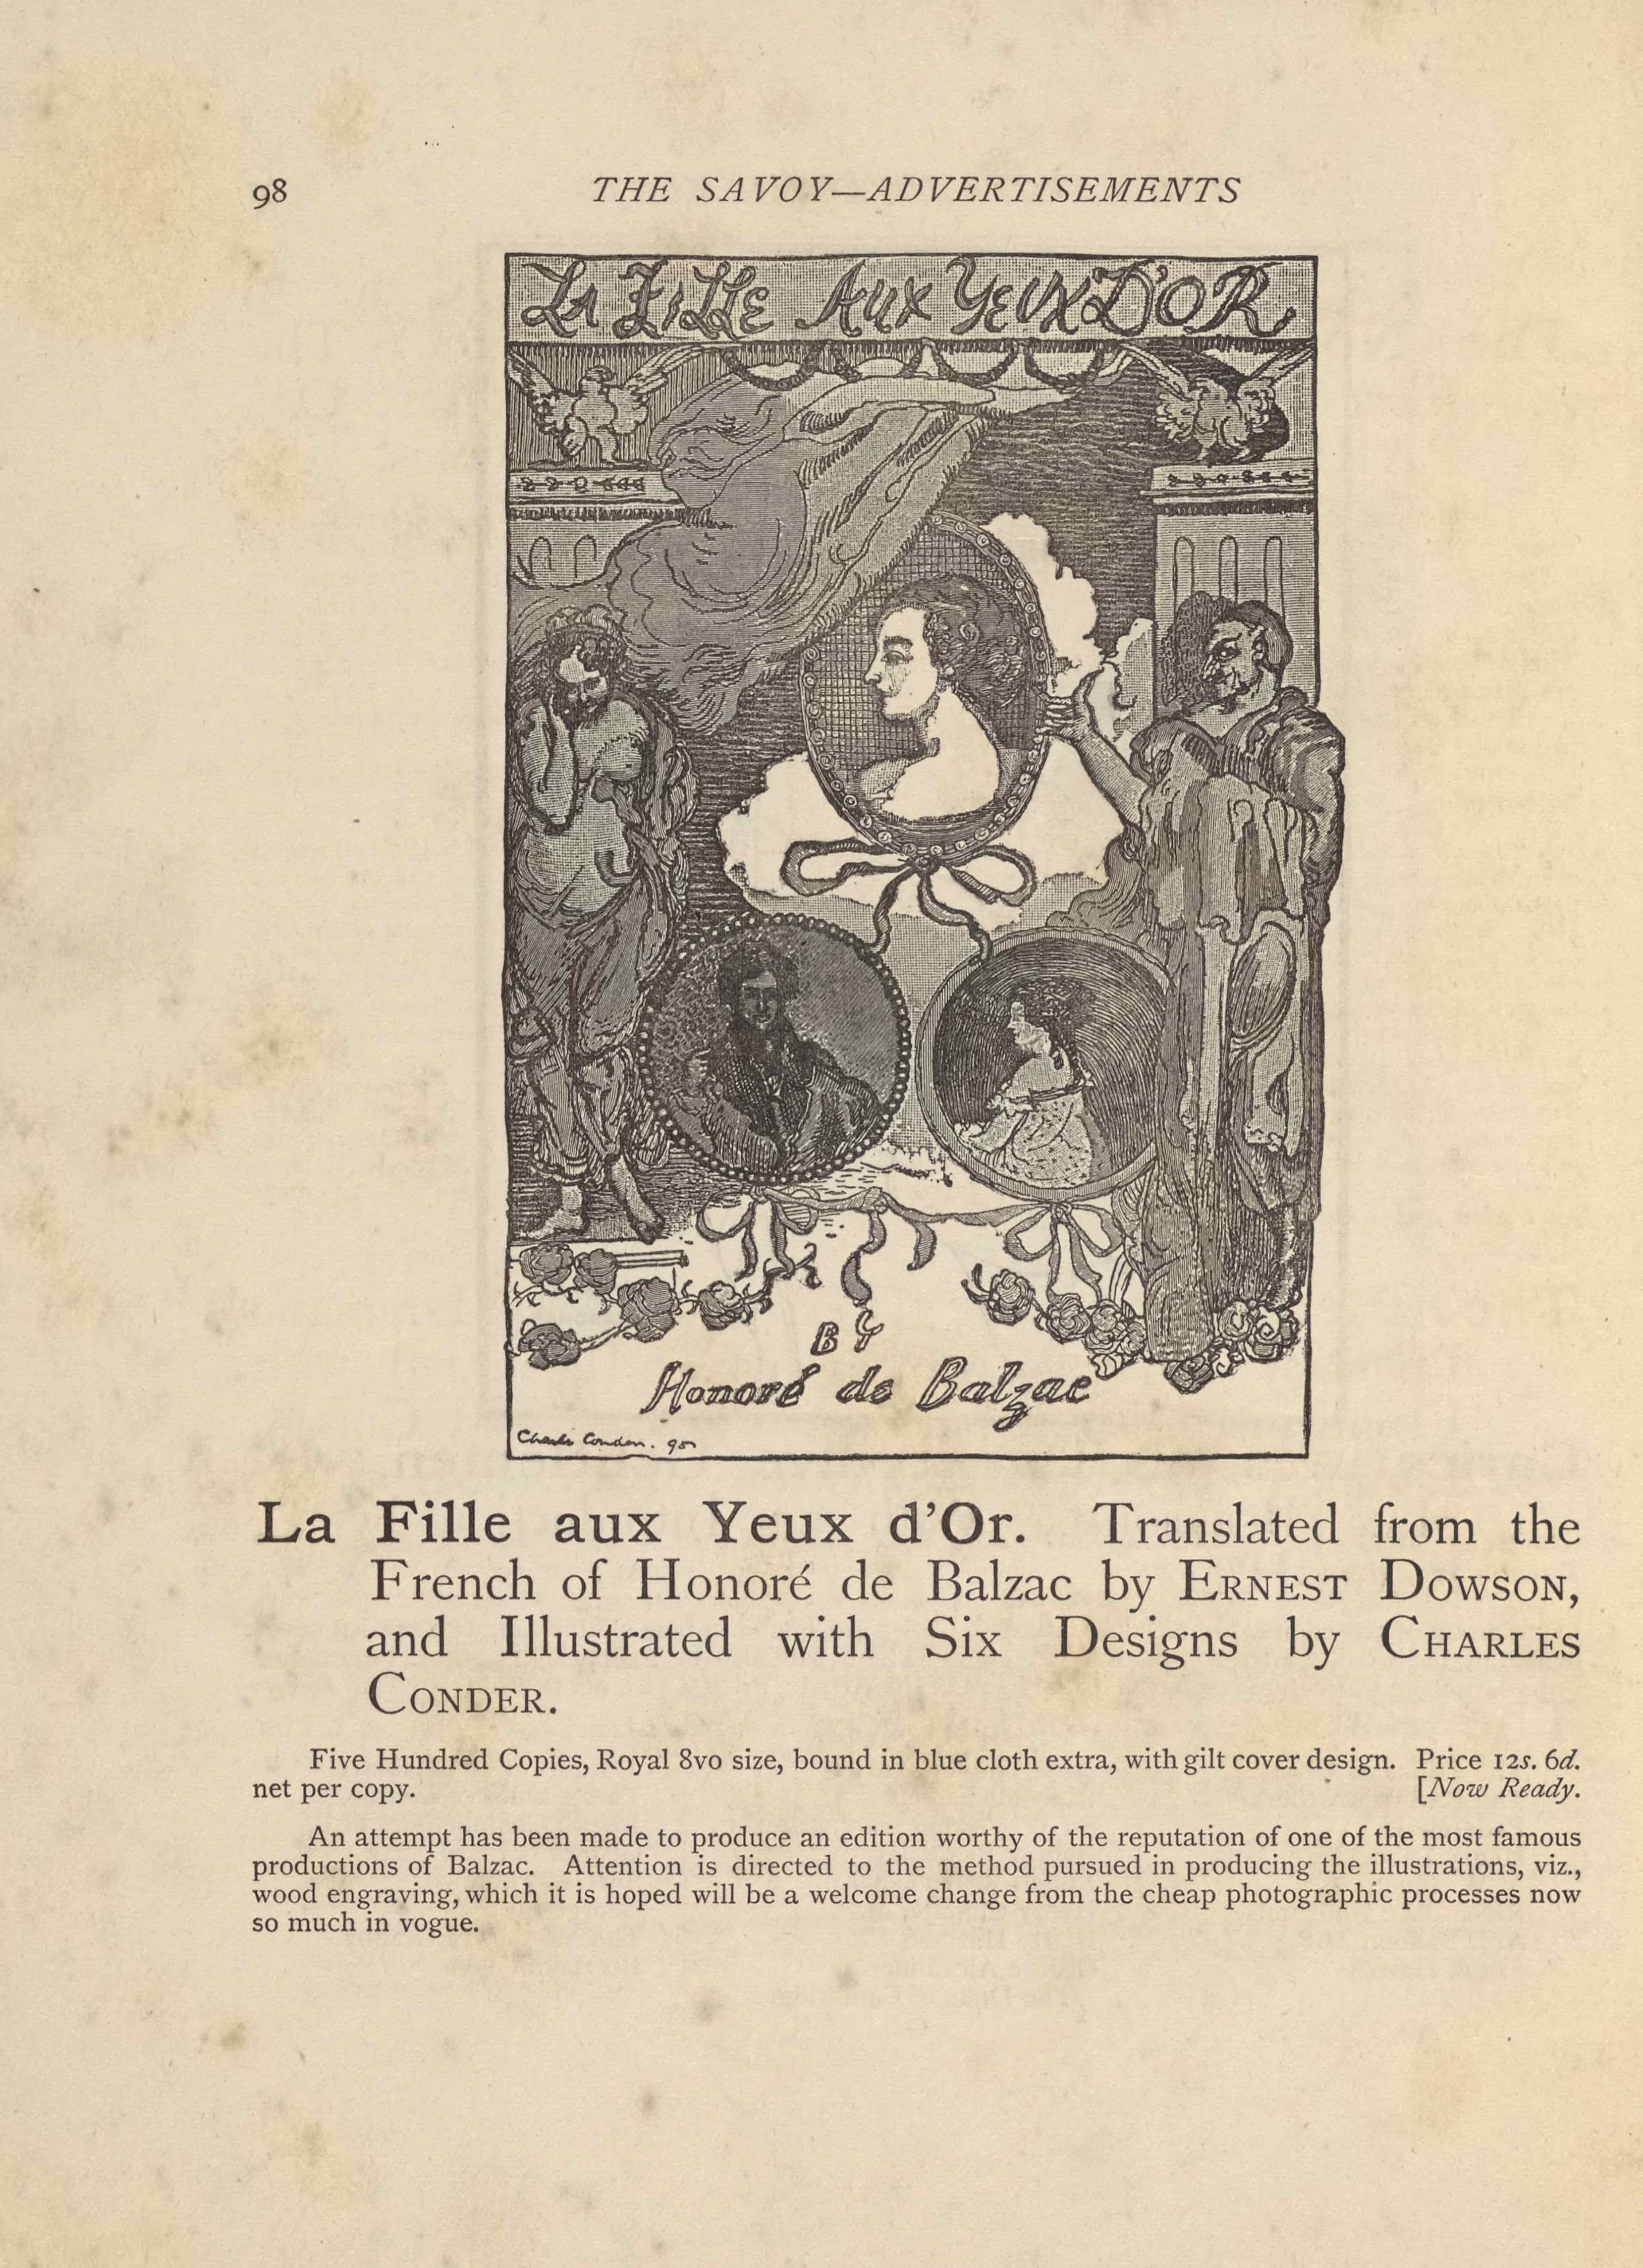 The image, a wood engraving of a crayon drawing by Charles Conder, is in portrait orientation. It is the frontispiece to Balzac’s La Fille Aux Yeux D’Or. This title, “LA FILLE AUX YEUX D’OR, appears in a banner with hand-lettered caps at the top edge. The text “BY [caps] // Honore de Balzac” is hand-lettered, centred, at the bottom. In the bottom left corner of the page is the artist’s signature and date: “Charles Conder. 90.”Between this publishing information are three cameo portraits suspended in cameos between two pillars fronted with allegorical figures. The two pillars rise to just below the line underscoring the title, leaving room for a falcon to sit atop each pillar. The falcons have their wings spread and their bodies facing the viewer, with their heads turned to face into the page towards each other. In the space on the upper page between the falcons and tops of the two pillars is a stream of cloudy smoke blowing from the centre of the separation line down and to the left, just in front of the left pillar. Behind the smoke is a black background made of close horizontal black lines. In the upper centre of the page is the top of the three medallion portraits. It is oval shaped and has an image of a woman in profile facing to the left. She is only visible from the shoulders and above, and has short curled hair pulled into an updo hairstyle. There is no clothing visible on her bare shoulders. The ornamental frame has a large bow hanging from the bottom edge. Behind the frame and down slightly on the page is another puff of smoke, but this one is much brighter and whiter than the one above. On the left edge of the page, standing in front of a pillar, is a half-clothed female figure. The woman is standing and facing the viewer, but her face is turned down to look at the ground. She has a nude upper body with material wrapped around her legs and behind her back. She has her right hand lifted up to cup the right side of her face. Her hair is curly and short. Her left foot is lifted slightly up from the ground on which she stands. To the right of the oval frame is a male figure standing in front of the pillar on the right. The man is wearing a robe made of many layers of draped material wrapped around him. He is standing to face the viewer, but his head is turned to face in towards the centre of the page. His face is visible in profile. He has his right arm lifted up and his long-nailed thumb is extended out to touch the edge of the oval frame. He has a hooked nose and a horn on his head, a seeming representation of the devil. His hair is short and dark. His shadow falls behind him and to the left, visible on the front of the pillar behind him. Between these standing figures are two more portrait frames, each perfectly circular. The medallion on the left shows a man facing the viewer. He has her dark hair and is wearing a dark jacket, shirt, and tie; his right hand is lifted up to his right shoulder. He is staring straight ahead. The medallion portrait beside this one is of a seated woman turned in profile to the left. The woman is visible from the waist up. She is wearing an off-the-shoulder top that is lightly shaded with polka-dots. She has curled hair that is pulled up on top her head. The two circular portraits are connected by ribbons and bows that hang down from the bottom of each of them and tied together in the middle space below. The remainder of the page is the light-coloured and festooned with roses.